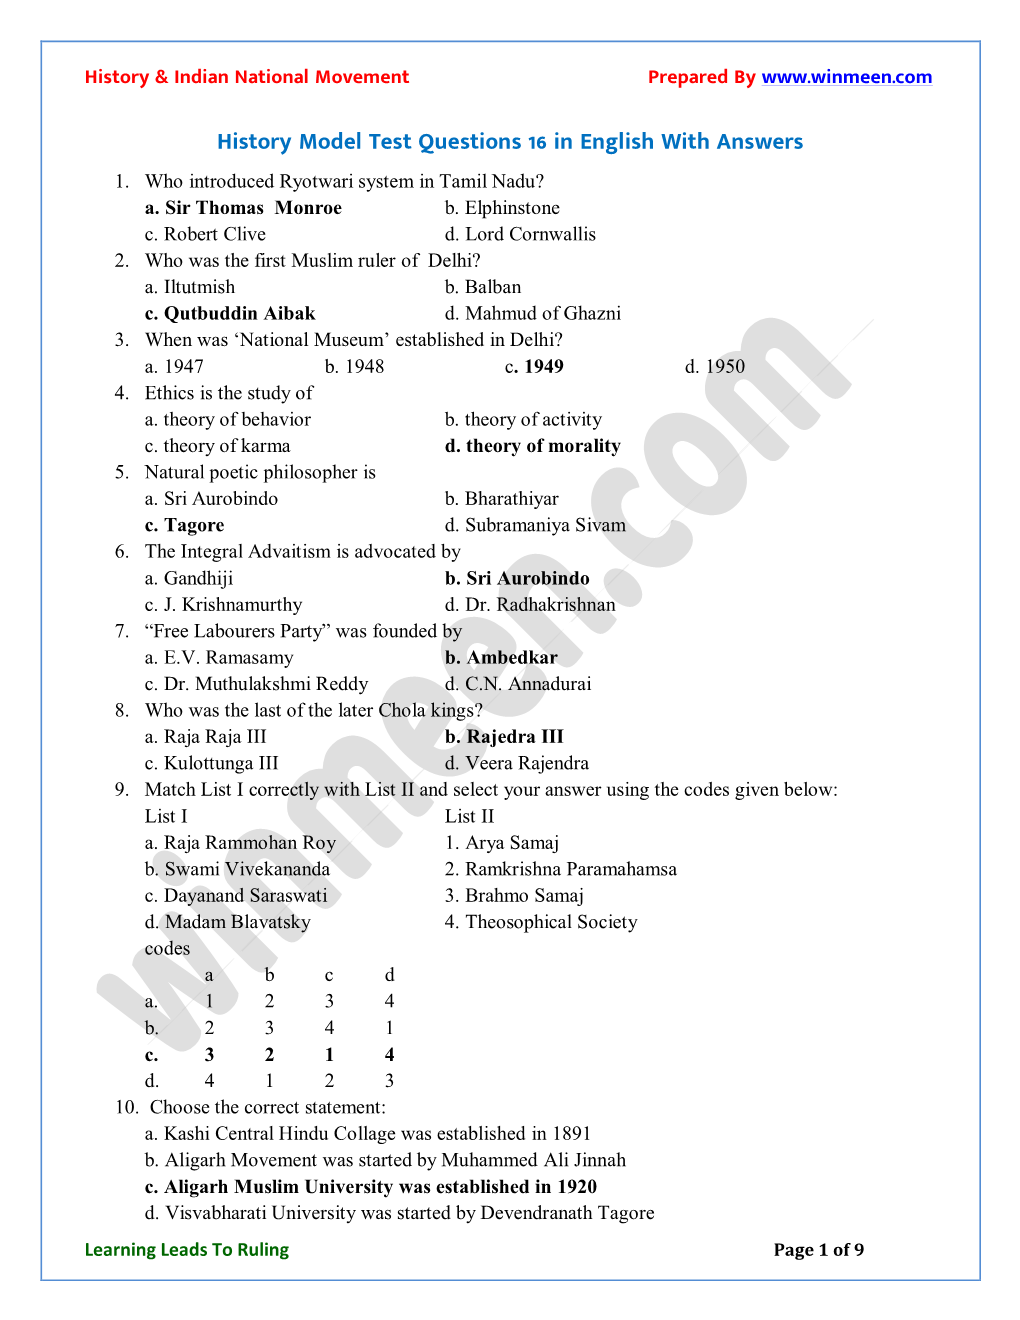 History Model Test Questions 16 in English with Answers 1